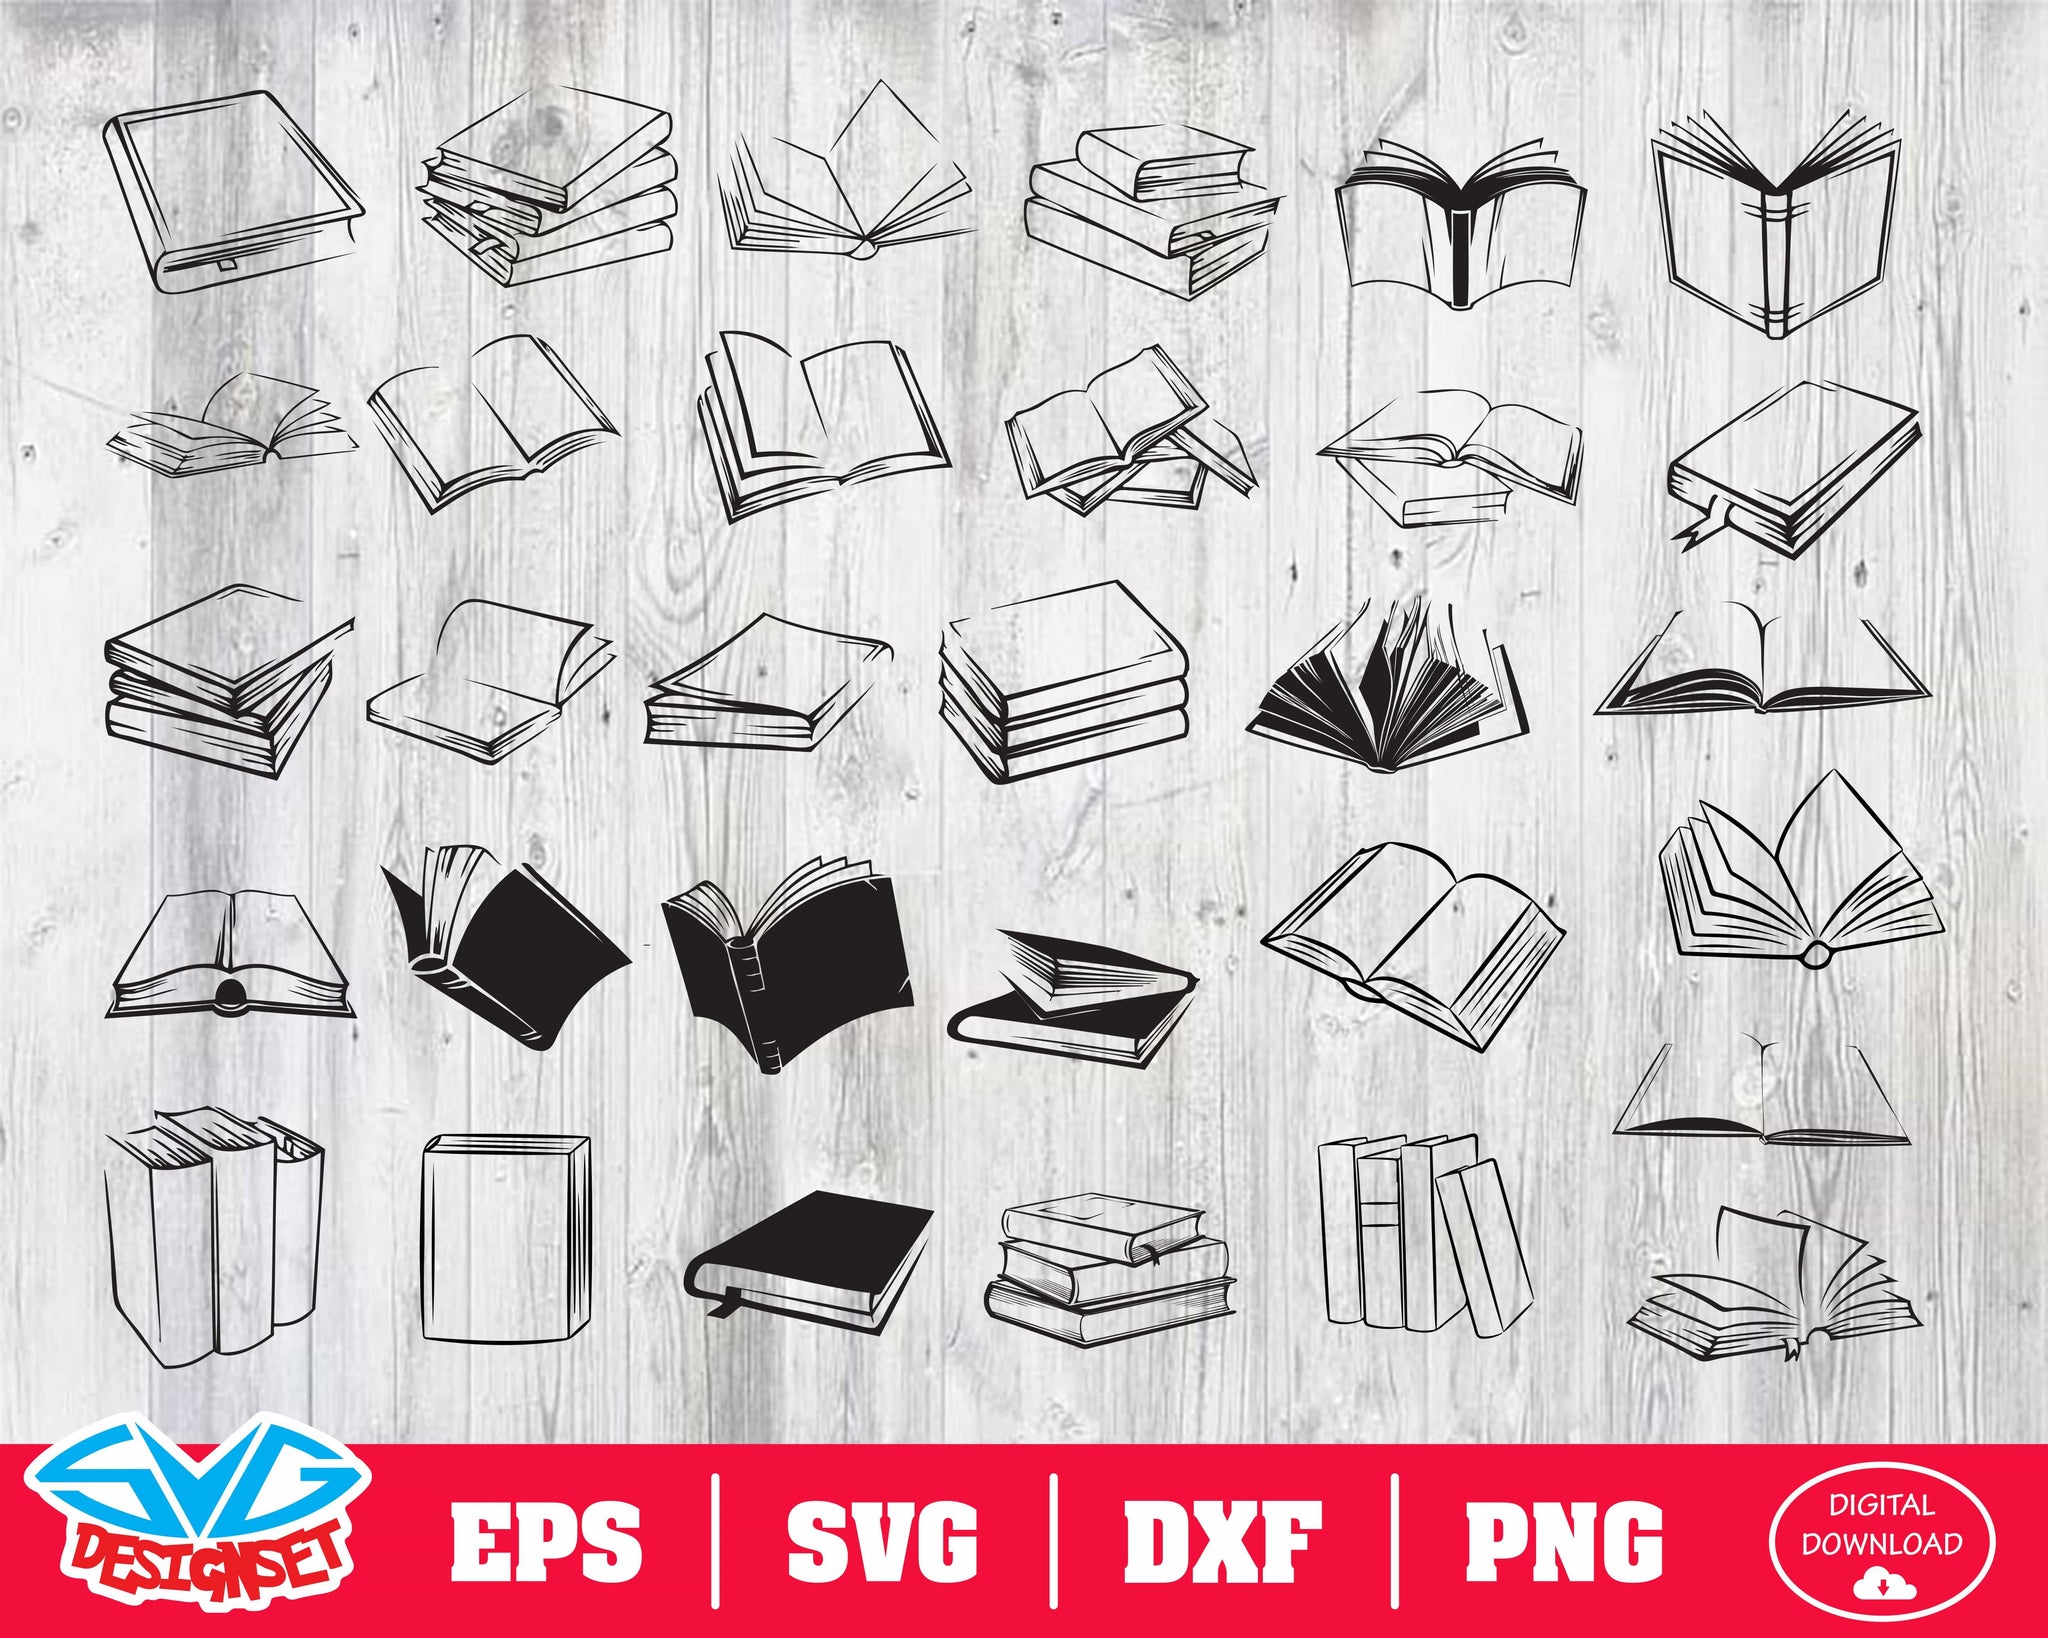 Book Svg, Dxf, Eps, Png, Clipart, Silhouette and Cutfiles - SVGDesignSets